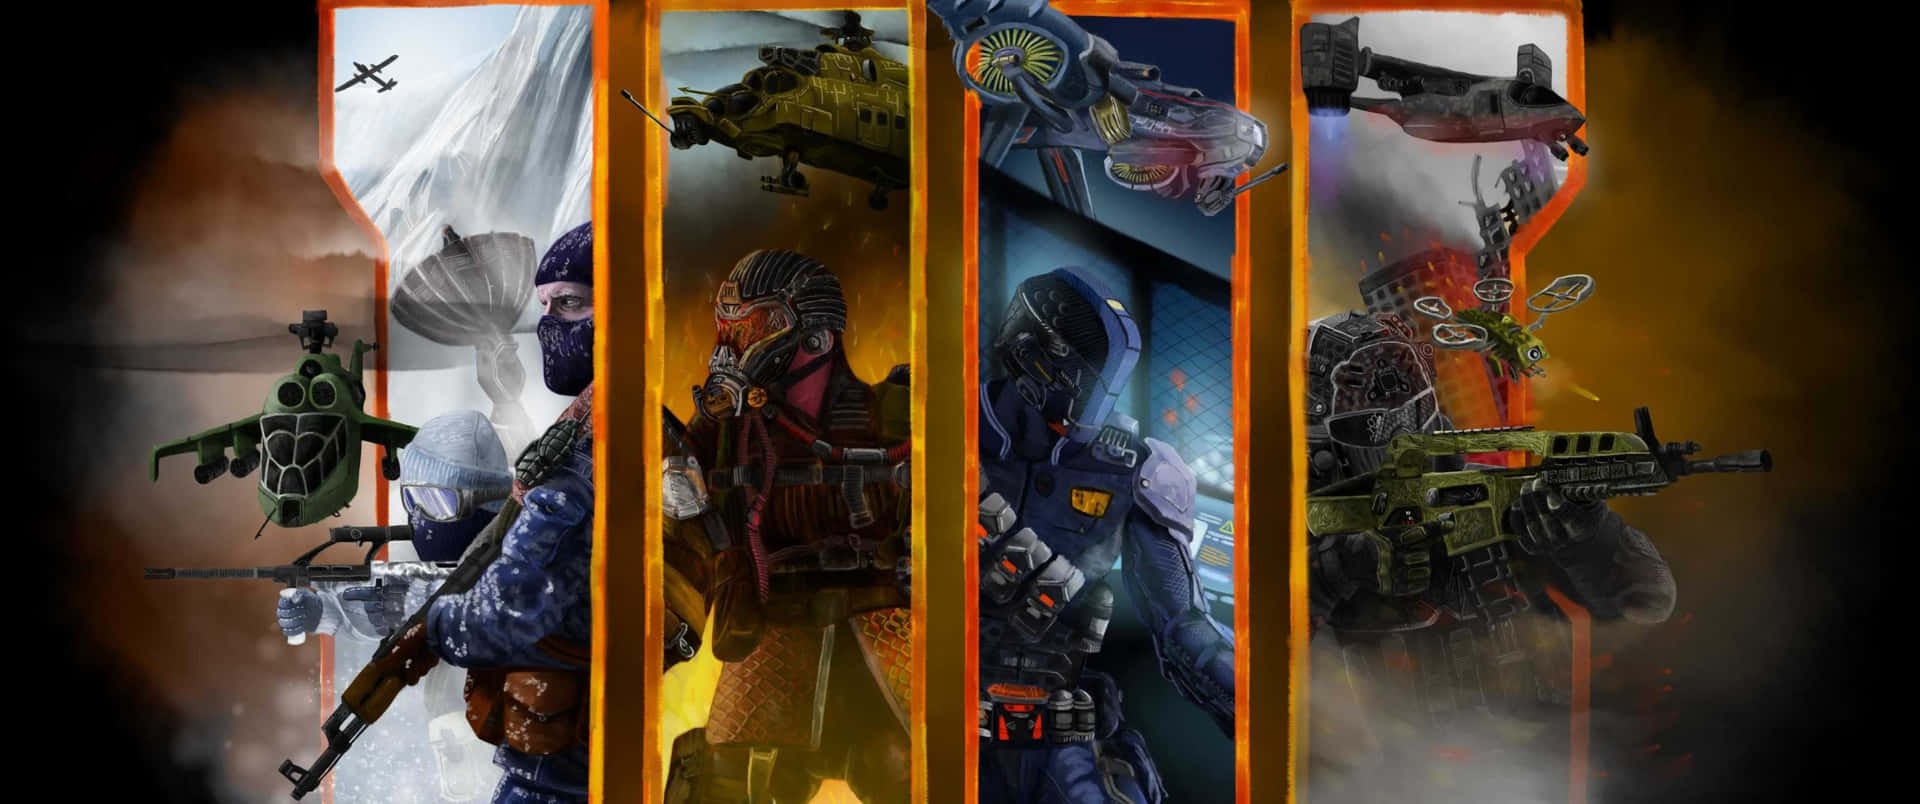 A Poster For Black Ops 3